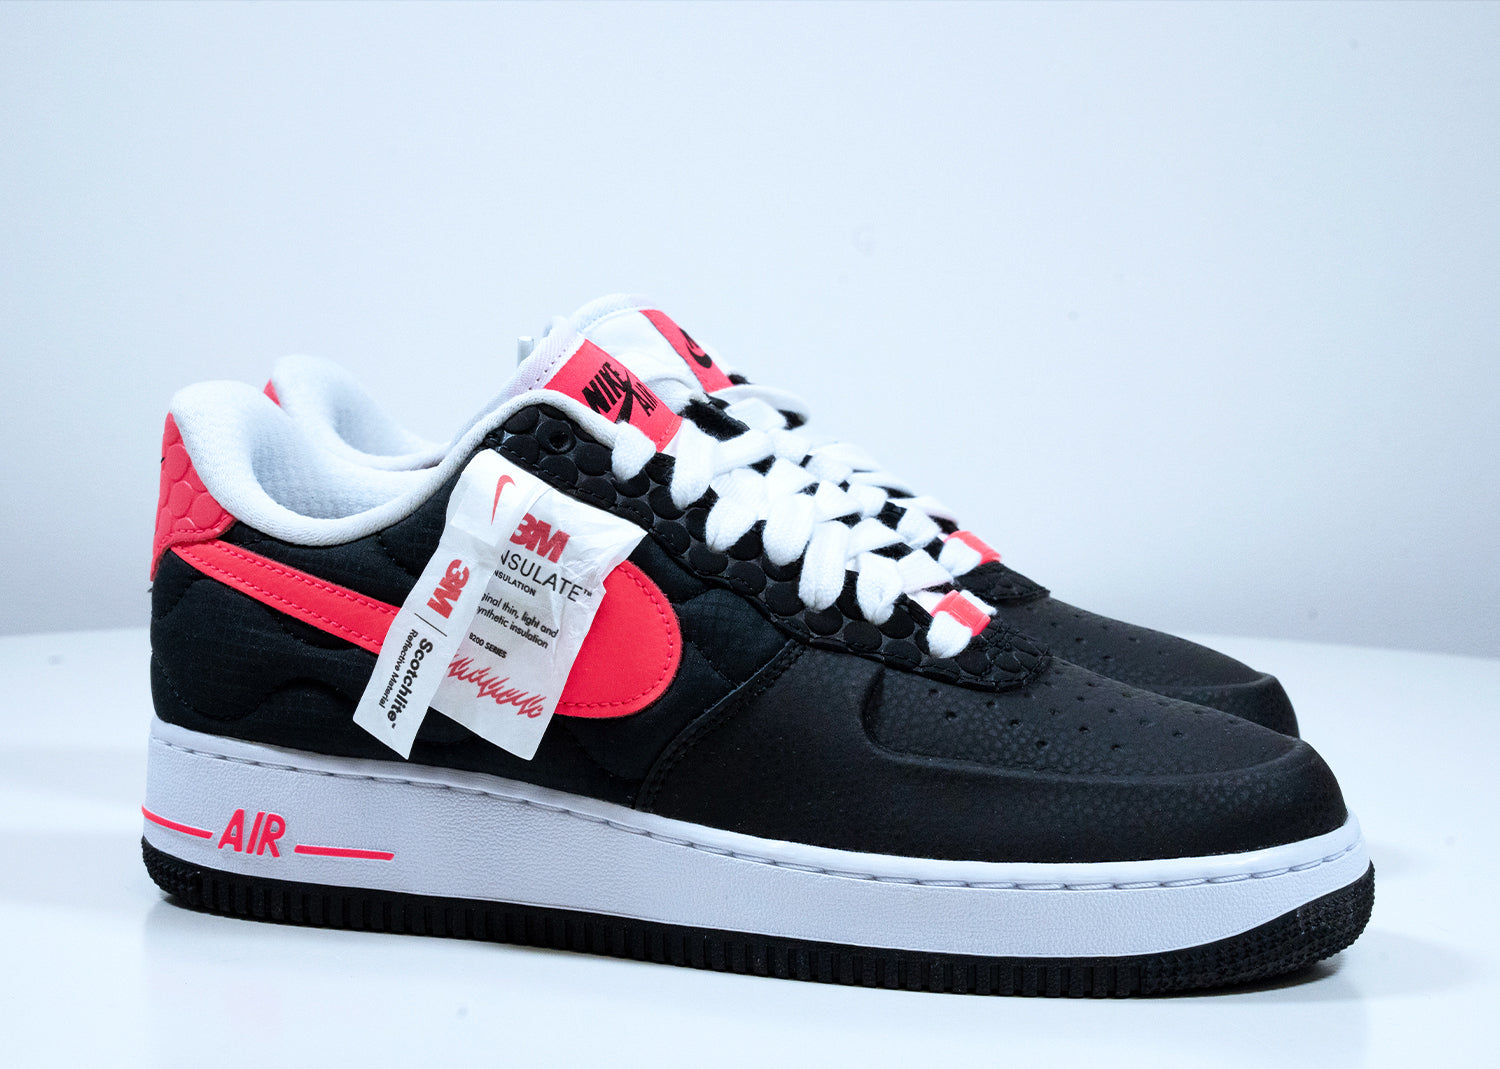 Second Chance - Air bell 1 ID 3M Black/Red - 41